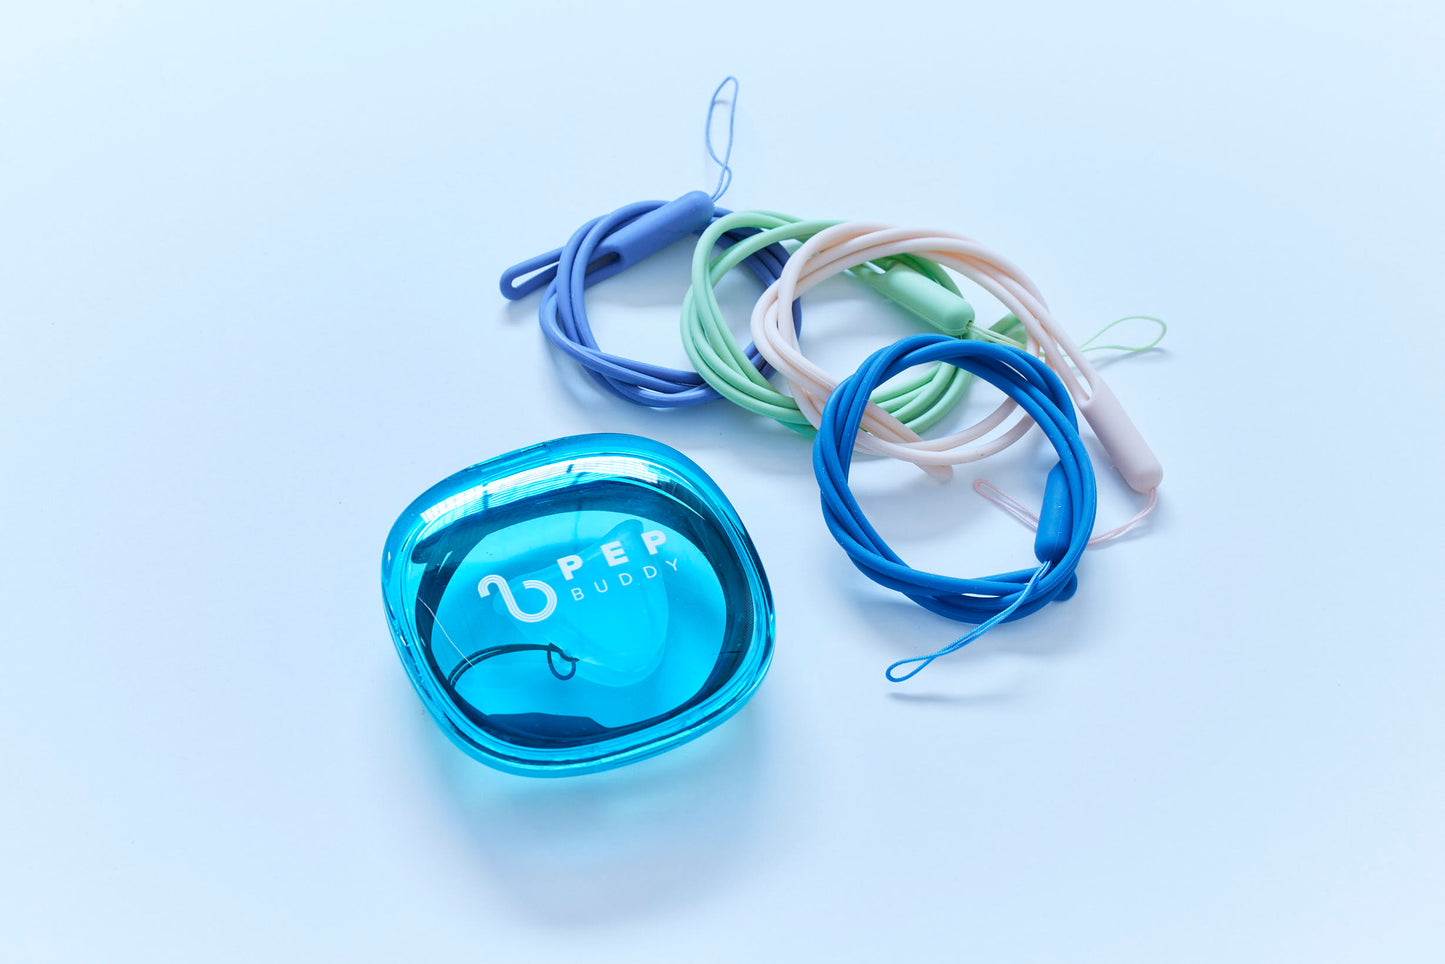 PEP Buddy: Breathing Device Bundle (Recommended)